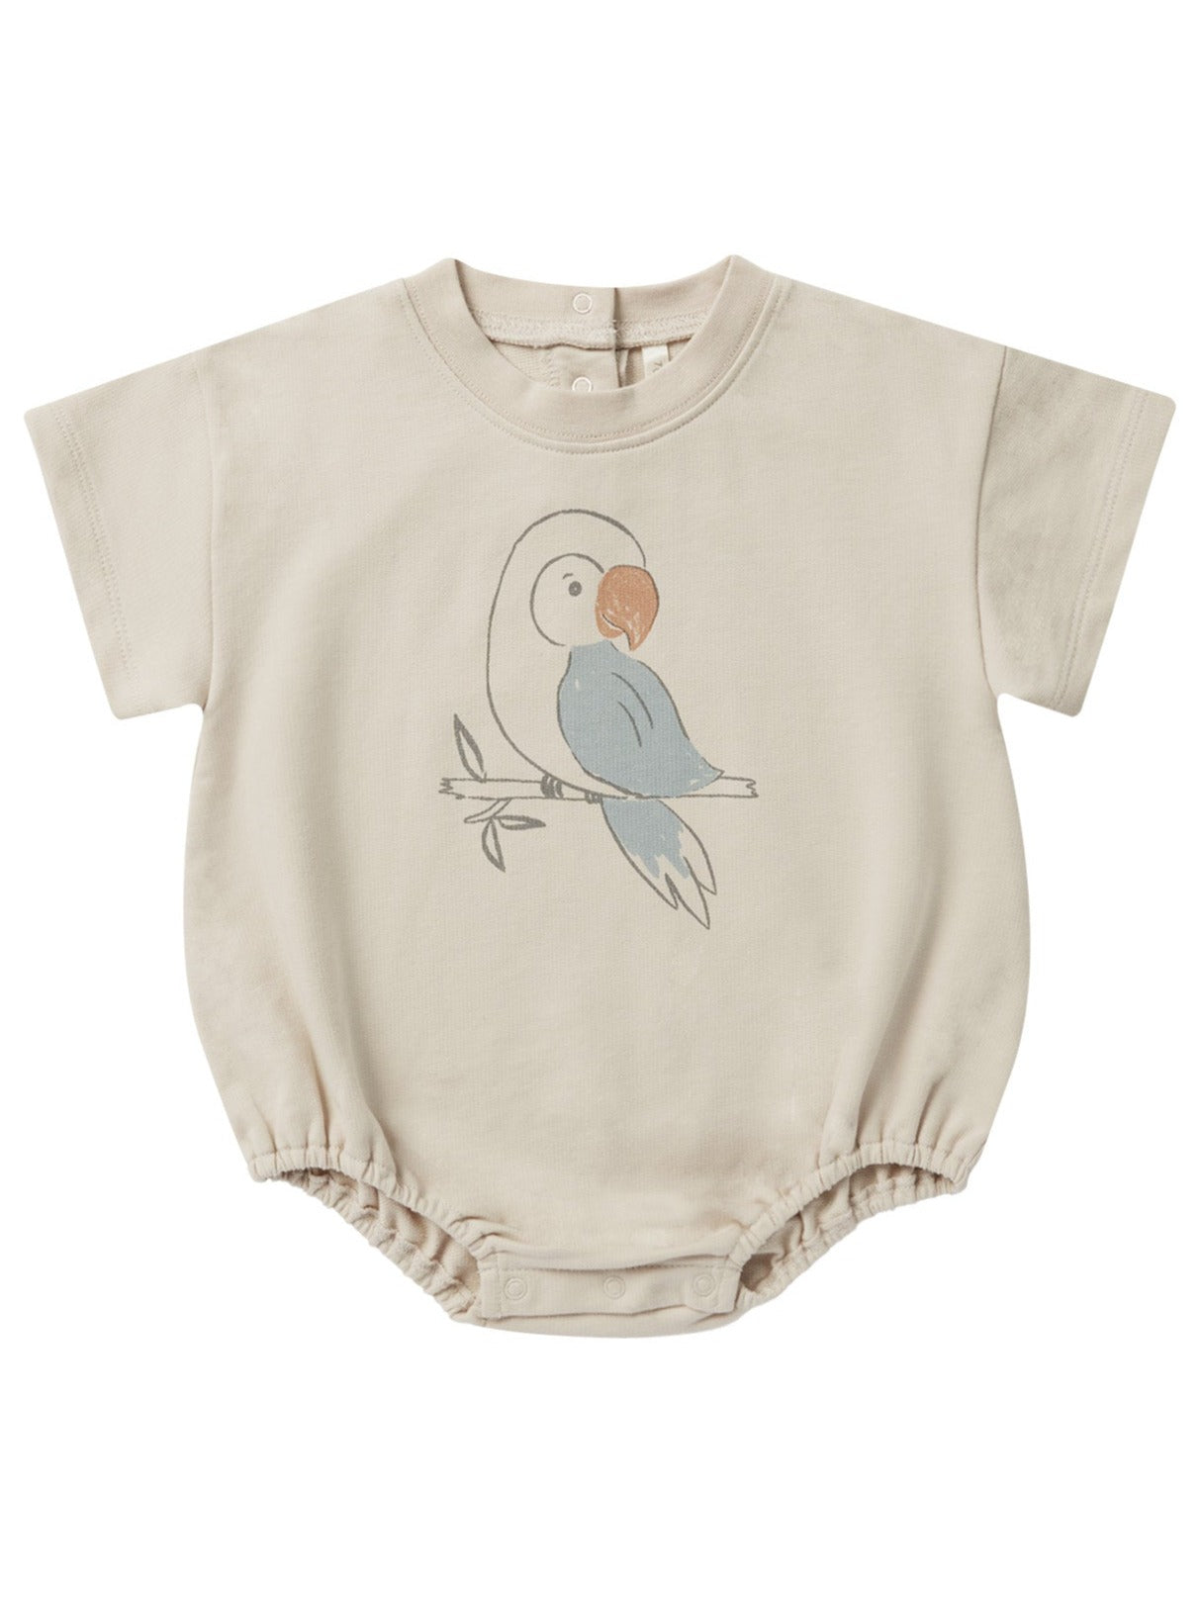 Rylee & Cru Relaxed Bubble Romper, Parrot